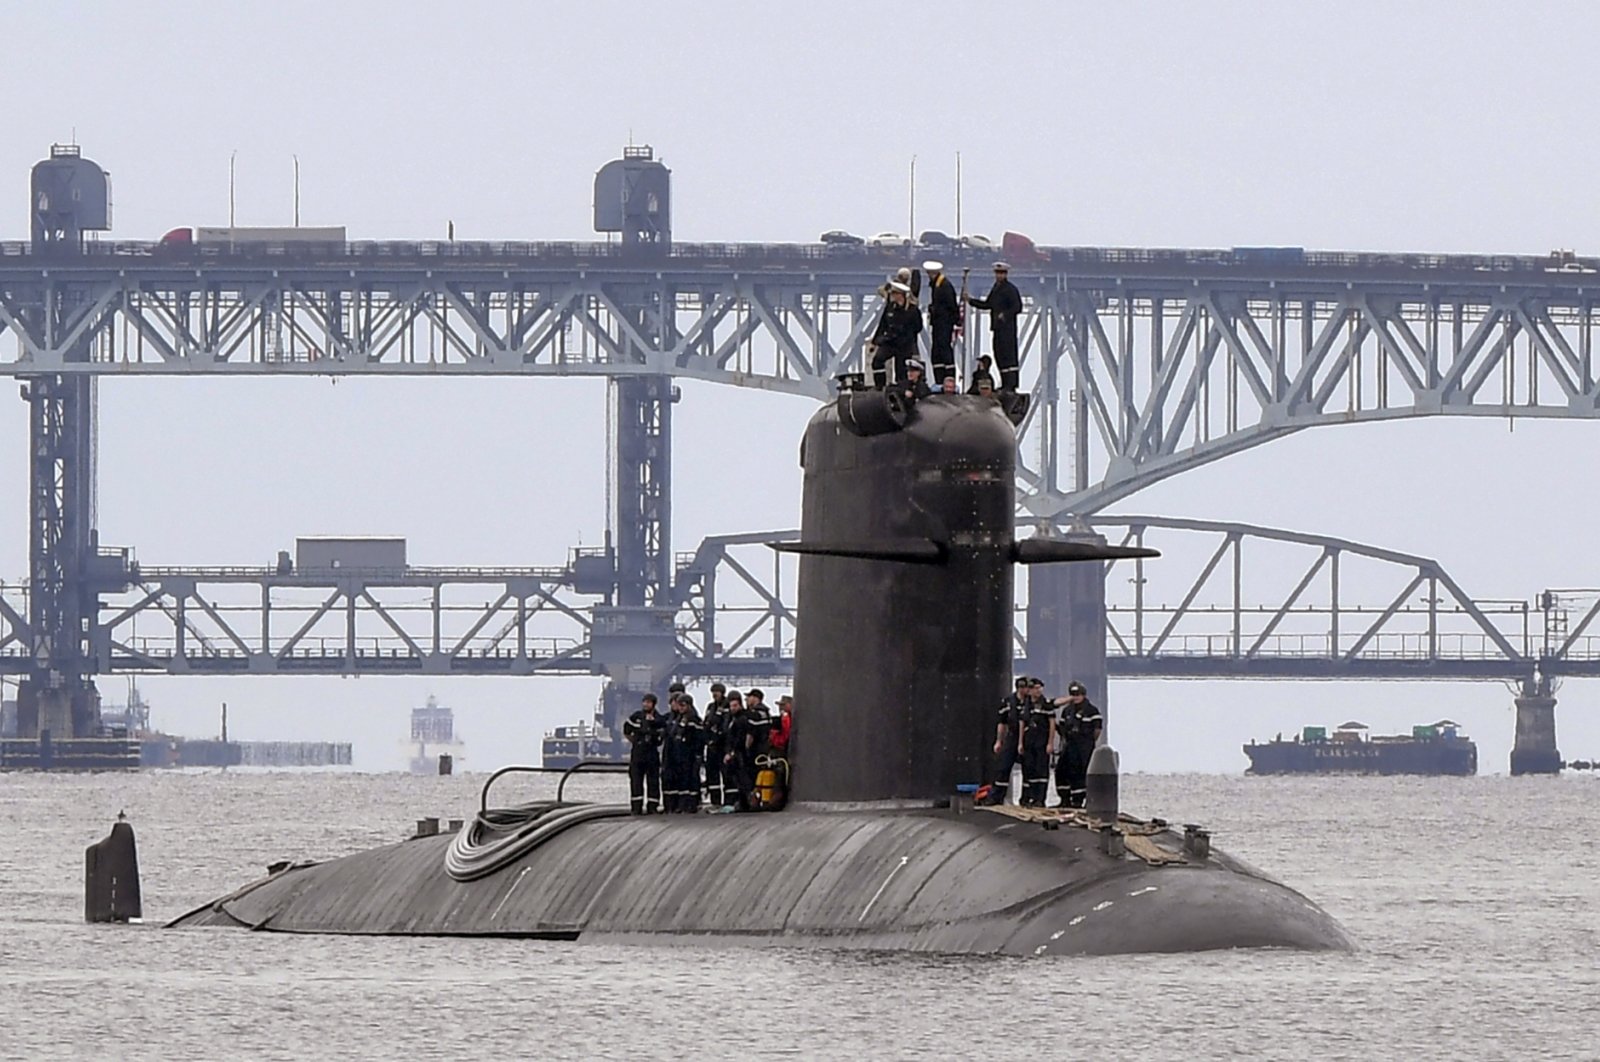 In this photo provided by U.S. Navy, French submarine FNS Amethyste (S605) transits the Thames River in preparation to arrive at Naval Submarine Base New London in Groton, Connecticut, U.S., Sept. 1, 2021. (U.S. Navy via AP)